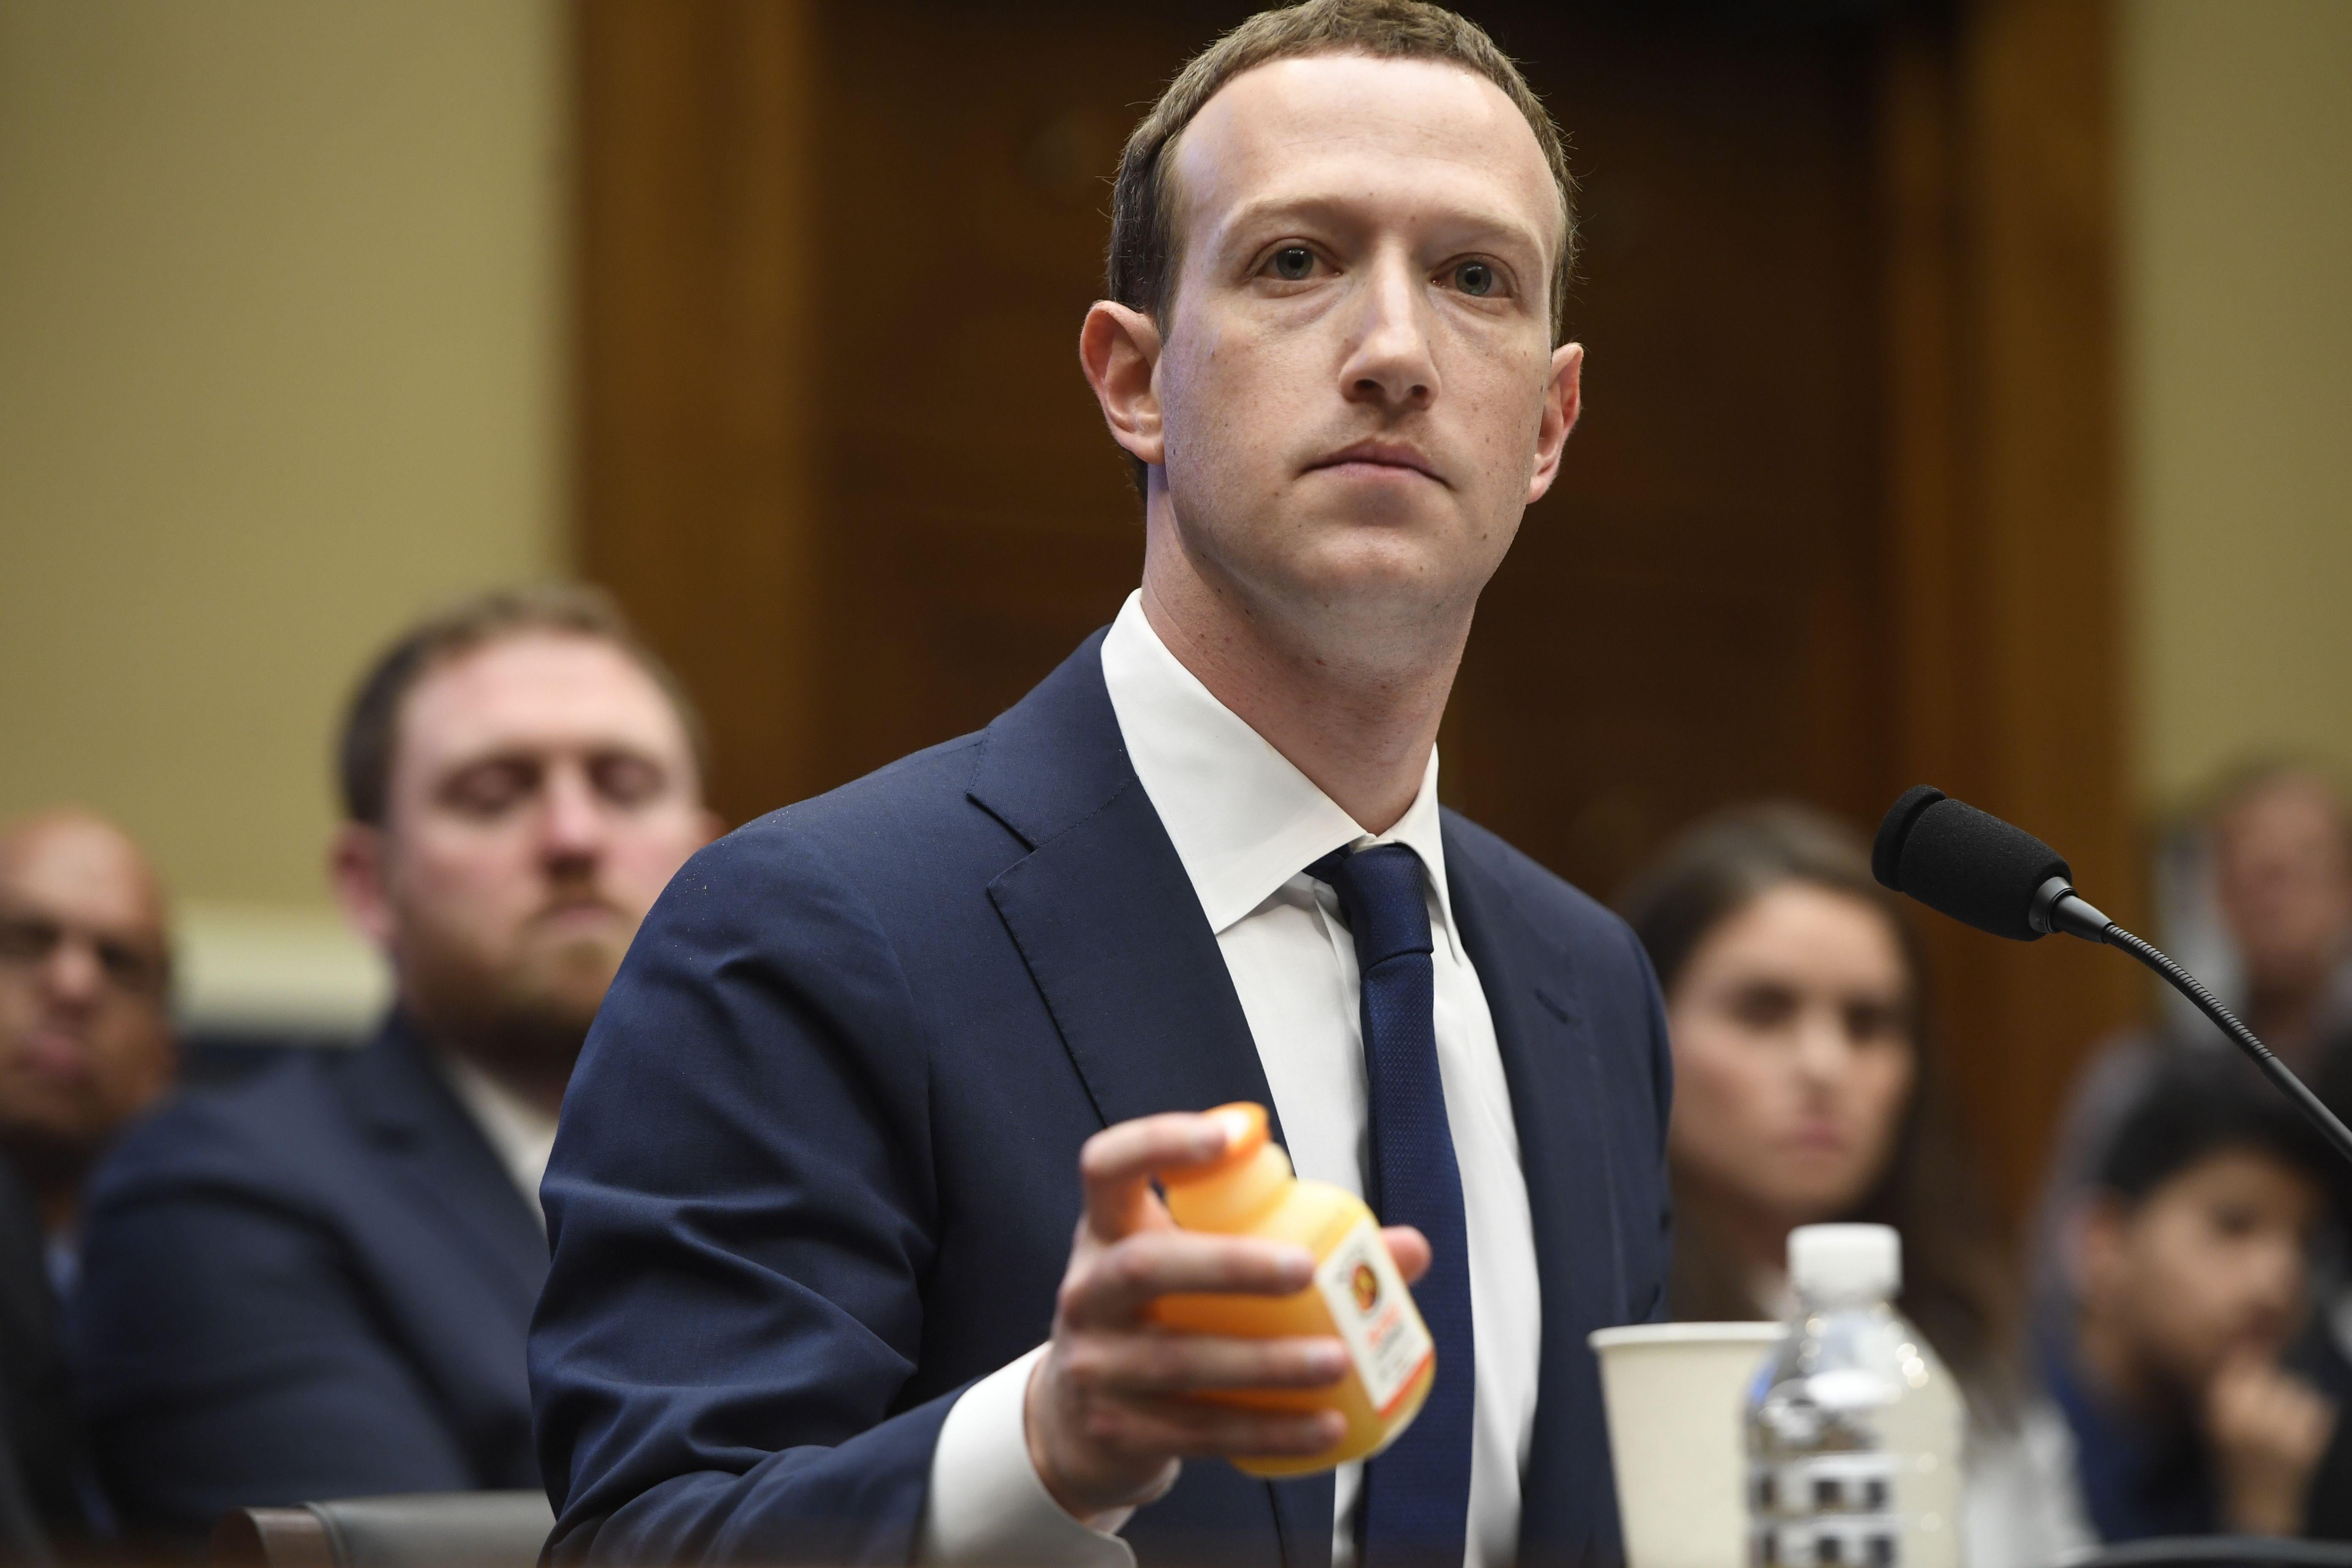 Facebook CEO and founder Mark Zuckerberg testifies during a House Committee on Energy and Commerce hearing.